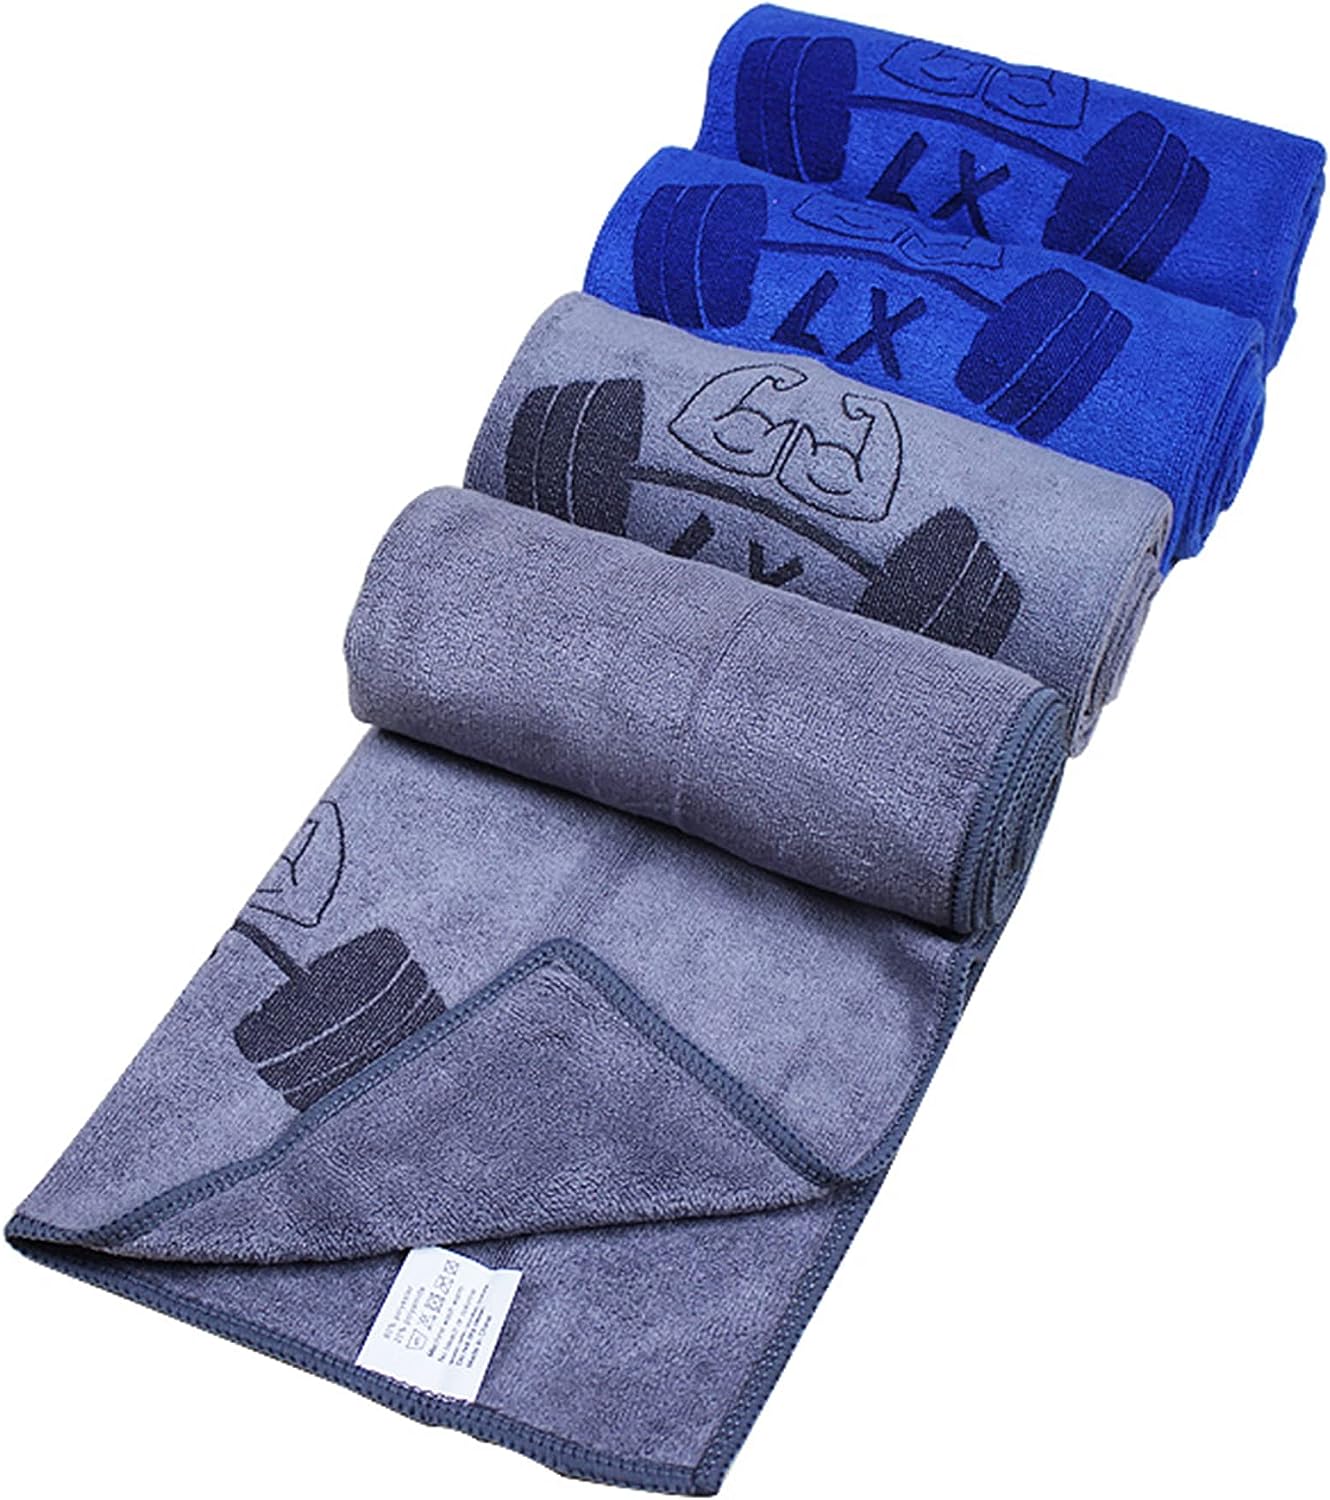 Cotton Yoga Towel(13.7" x 27.5"), Gym Towel Set, Cool Waffle Pattern Towel for Neck and Face, Soft Breathable Towel for Yoga, Sports, Kitchen, Camping, Running, Workout